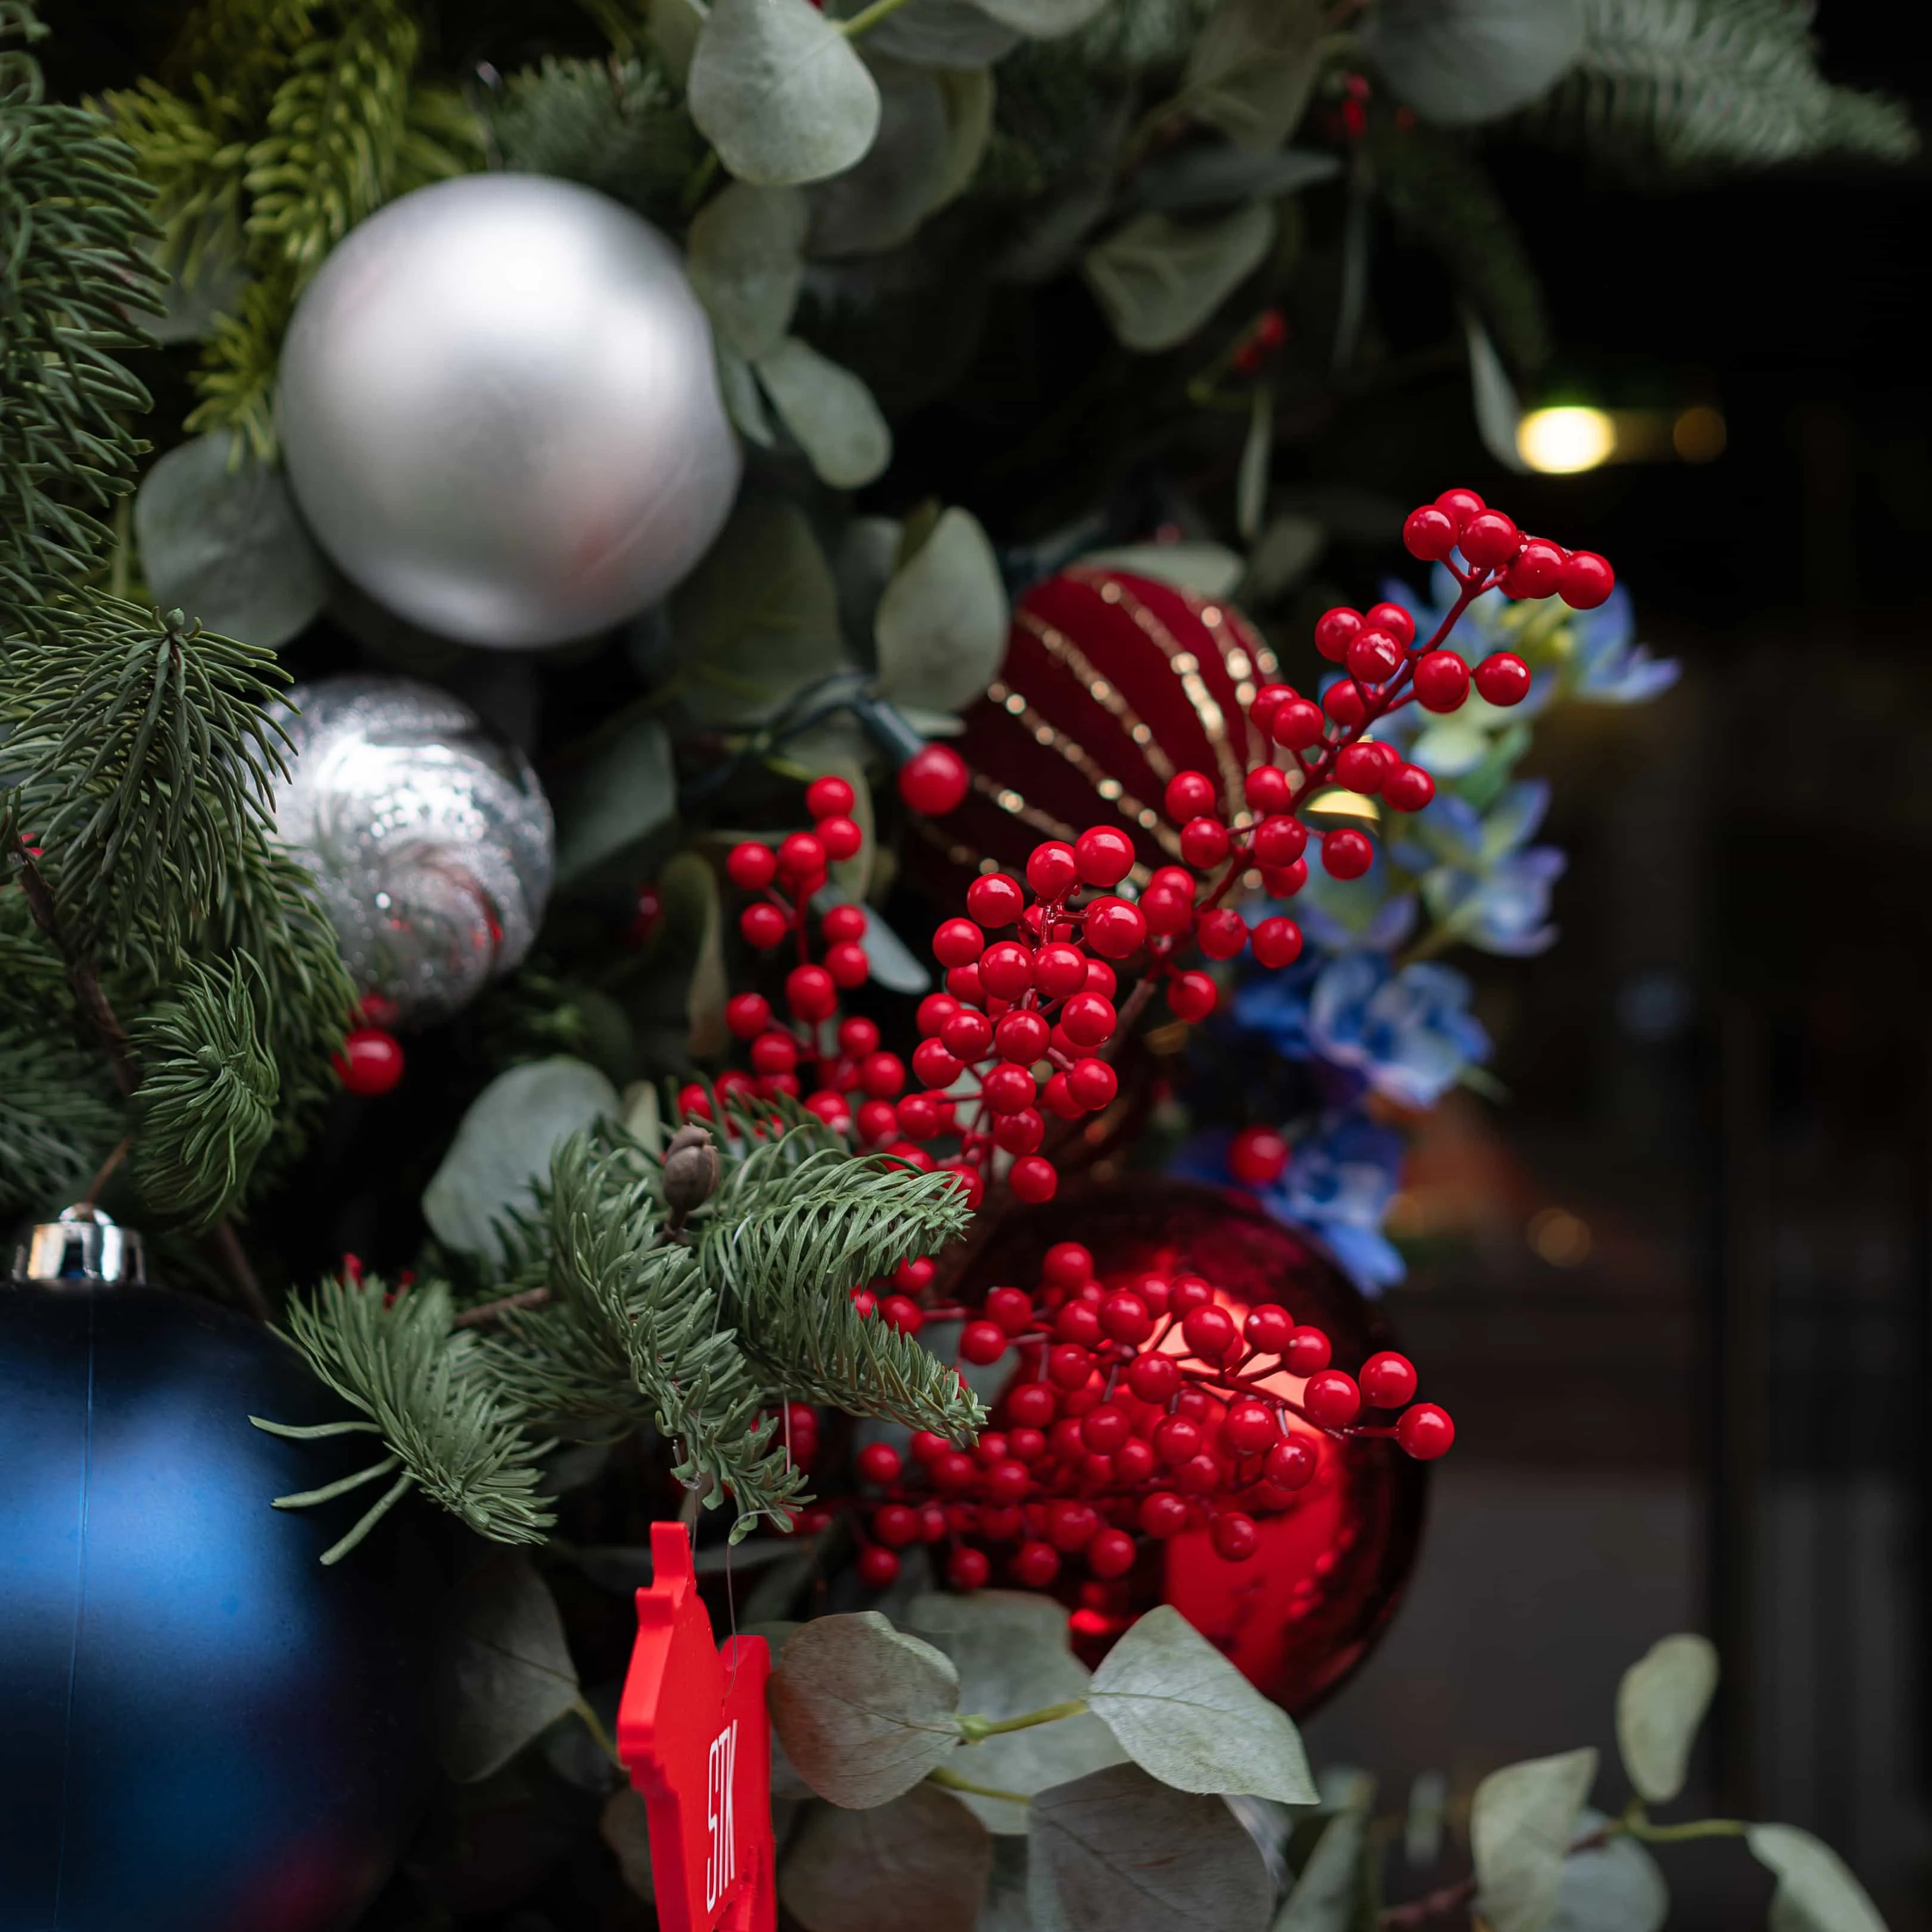 Detailed view of a Christmas floral arrangement at STK Steakhouse, highlighting shiny silver and red ornaments, bright red berry clusters, and a mixture of evergreen and eucalyptus leaves.